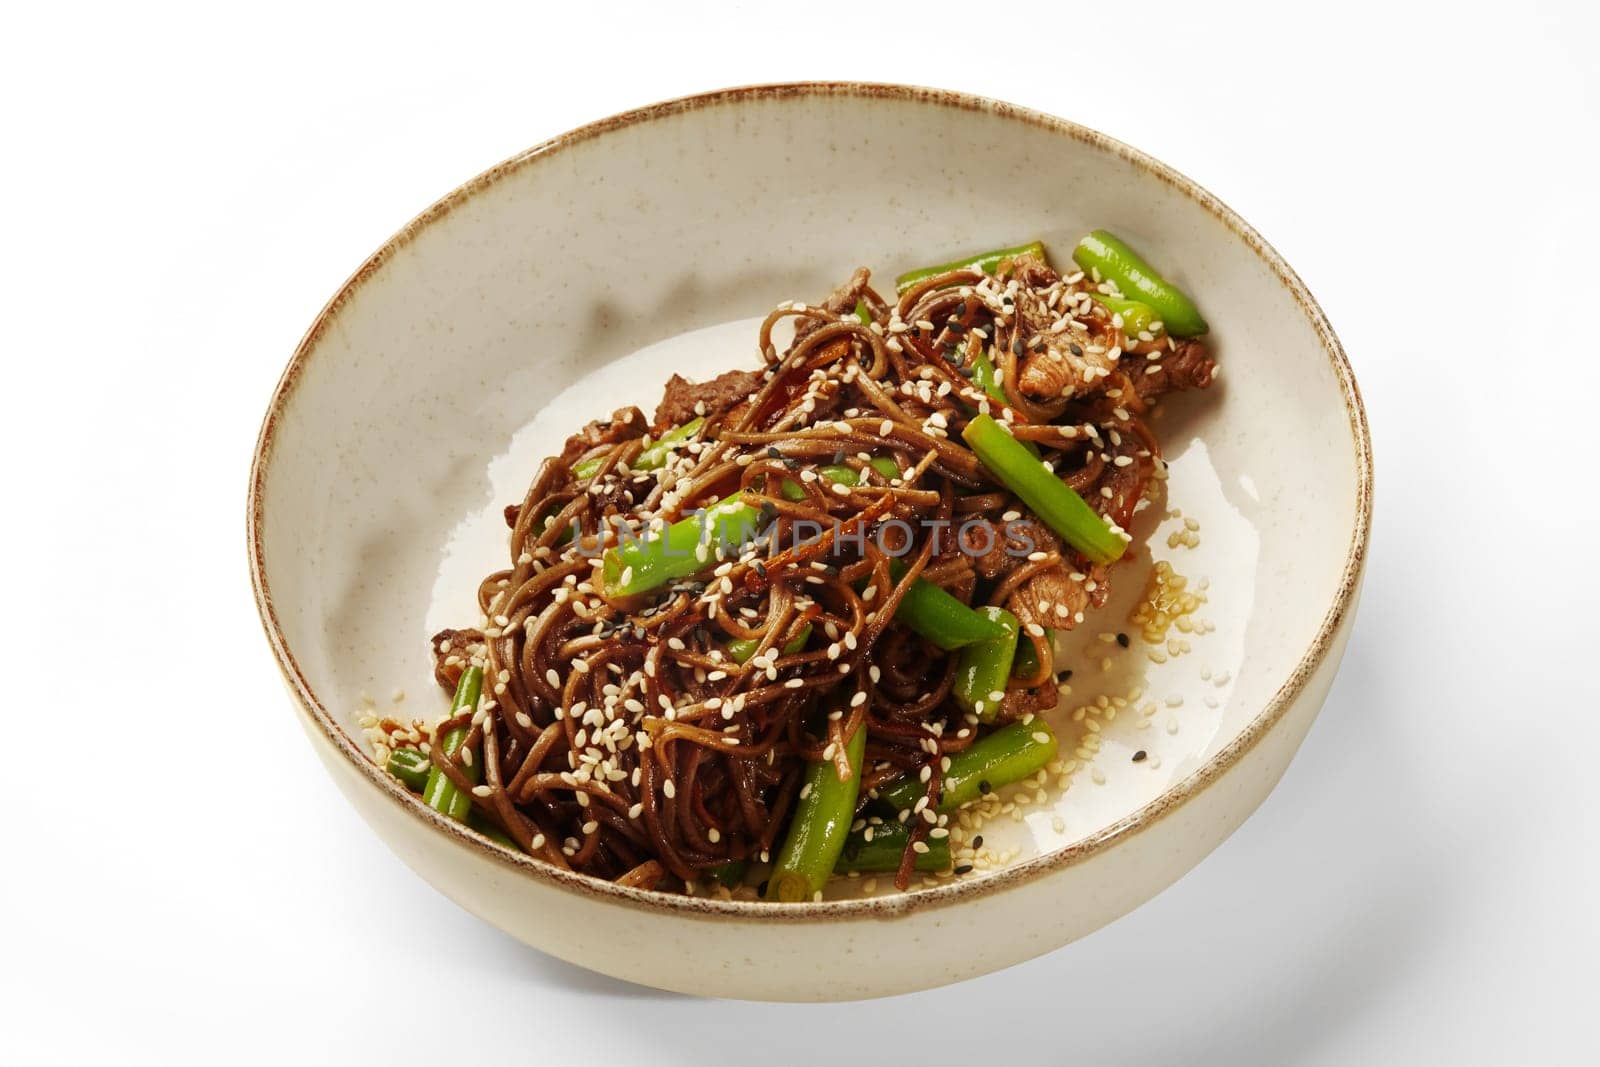 Beef soba noodle bowl with green beans and sesame by nazarovsergey